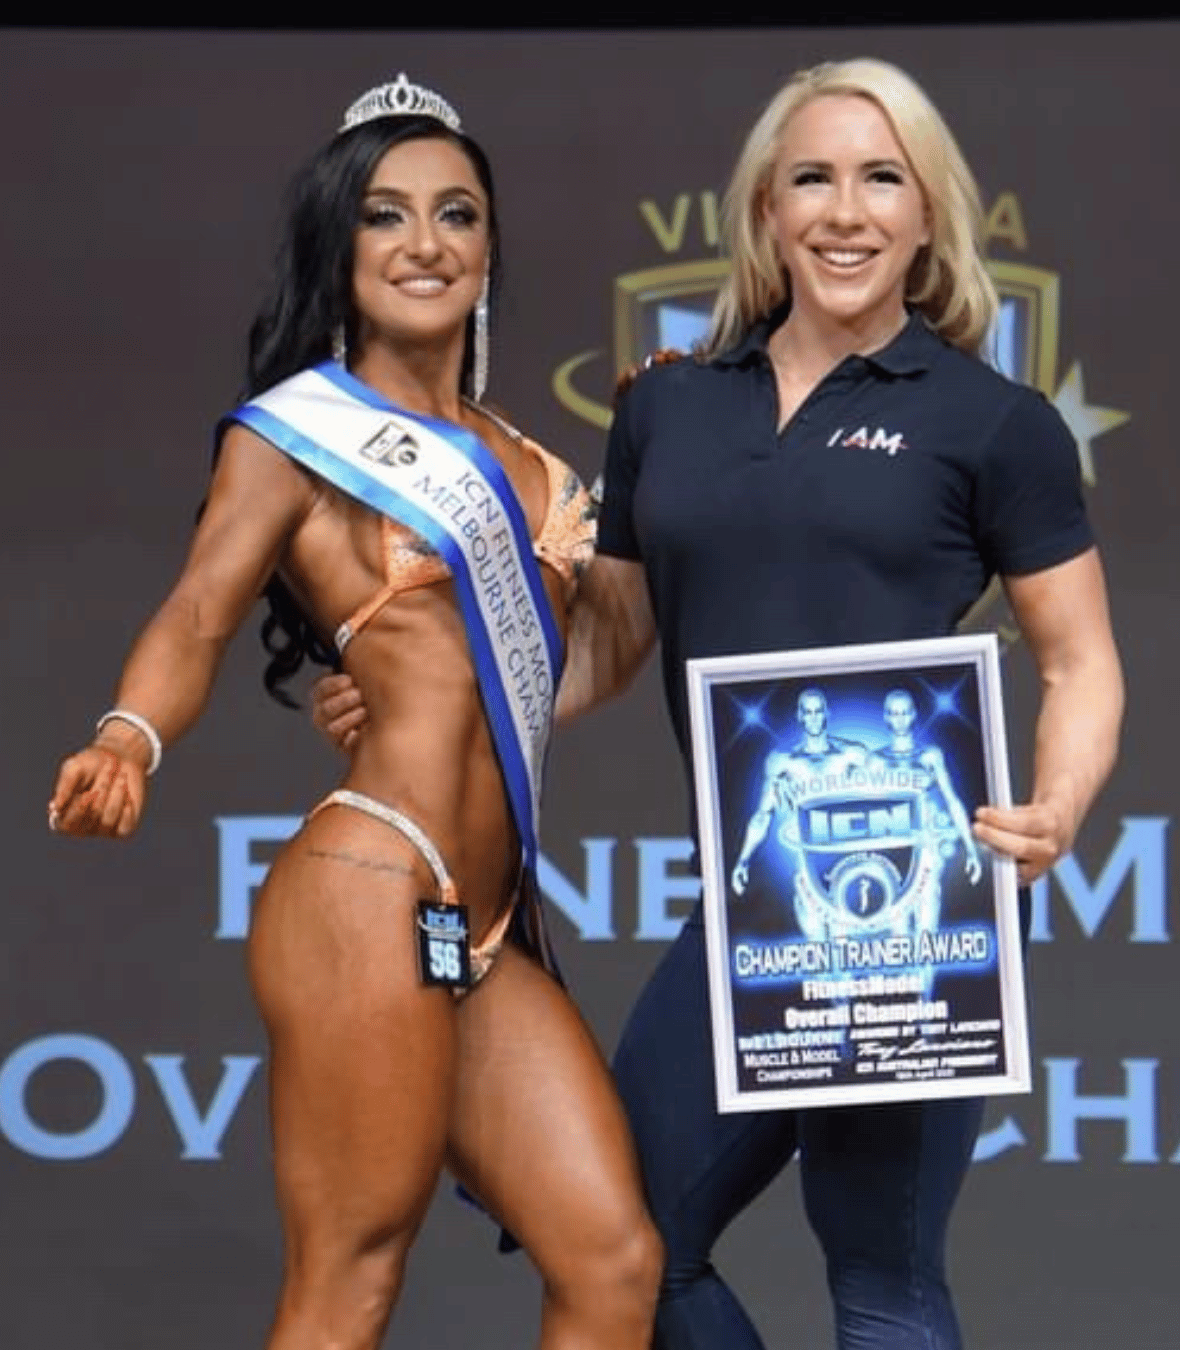 Anna McManamey Competition Prep Coach of ICN Fitness Model Champion